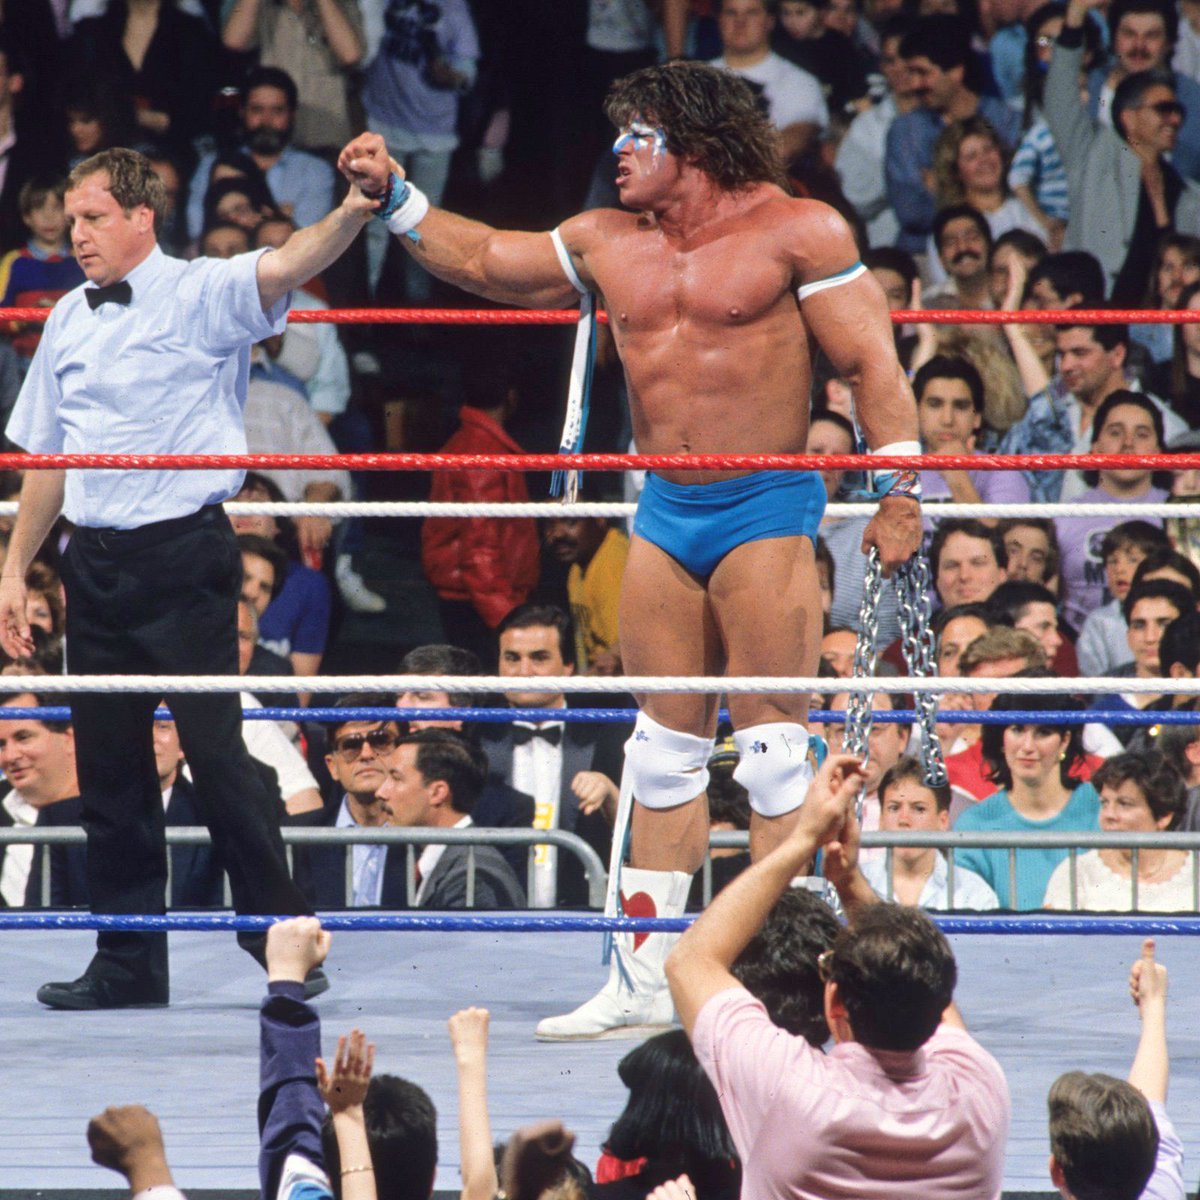 March to WrestleMania! Ultimate Warrior makes his 'Mania debut back in 1988. Defeating the mighty Hercules at WrestleMania IV. #WWF #WWE #Wrestling #WrestleMania #Hercules #UltimateWarrior